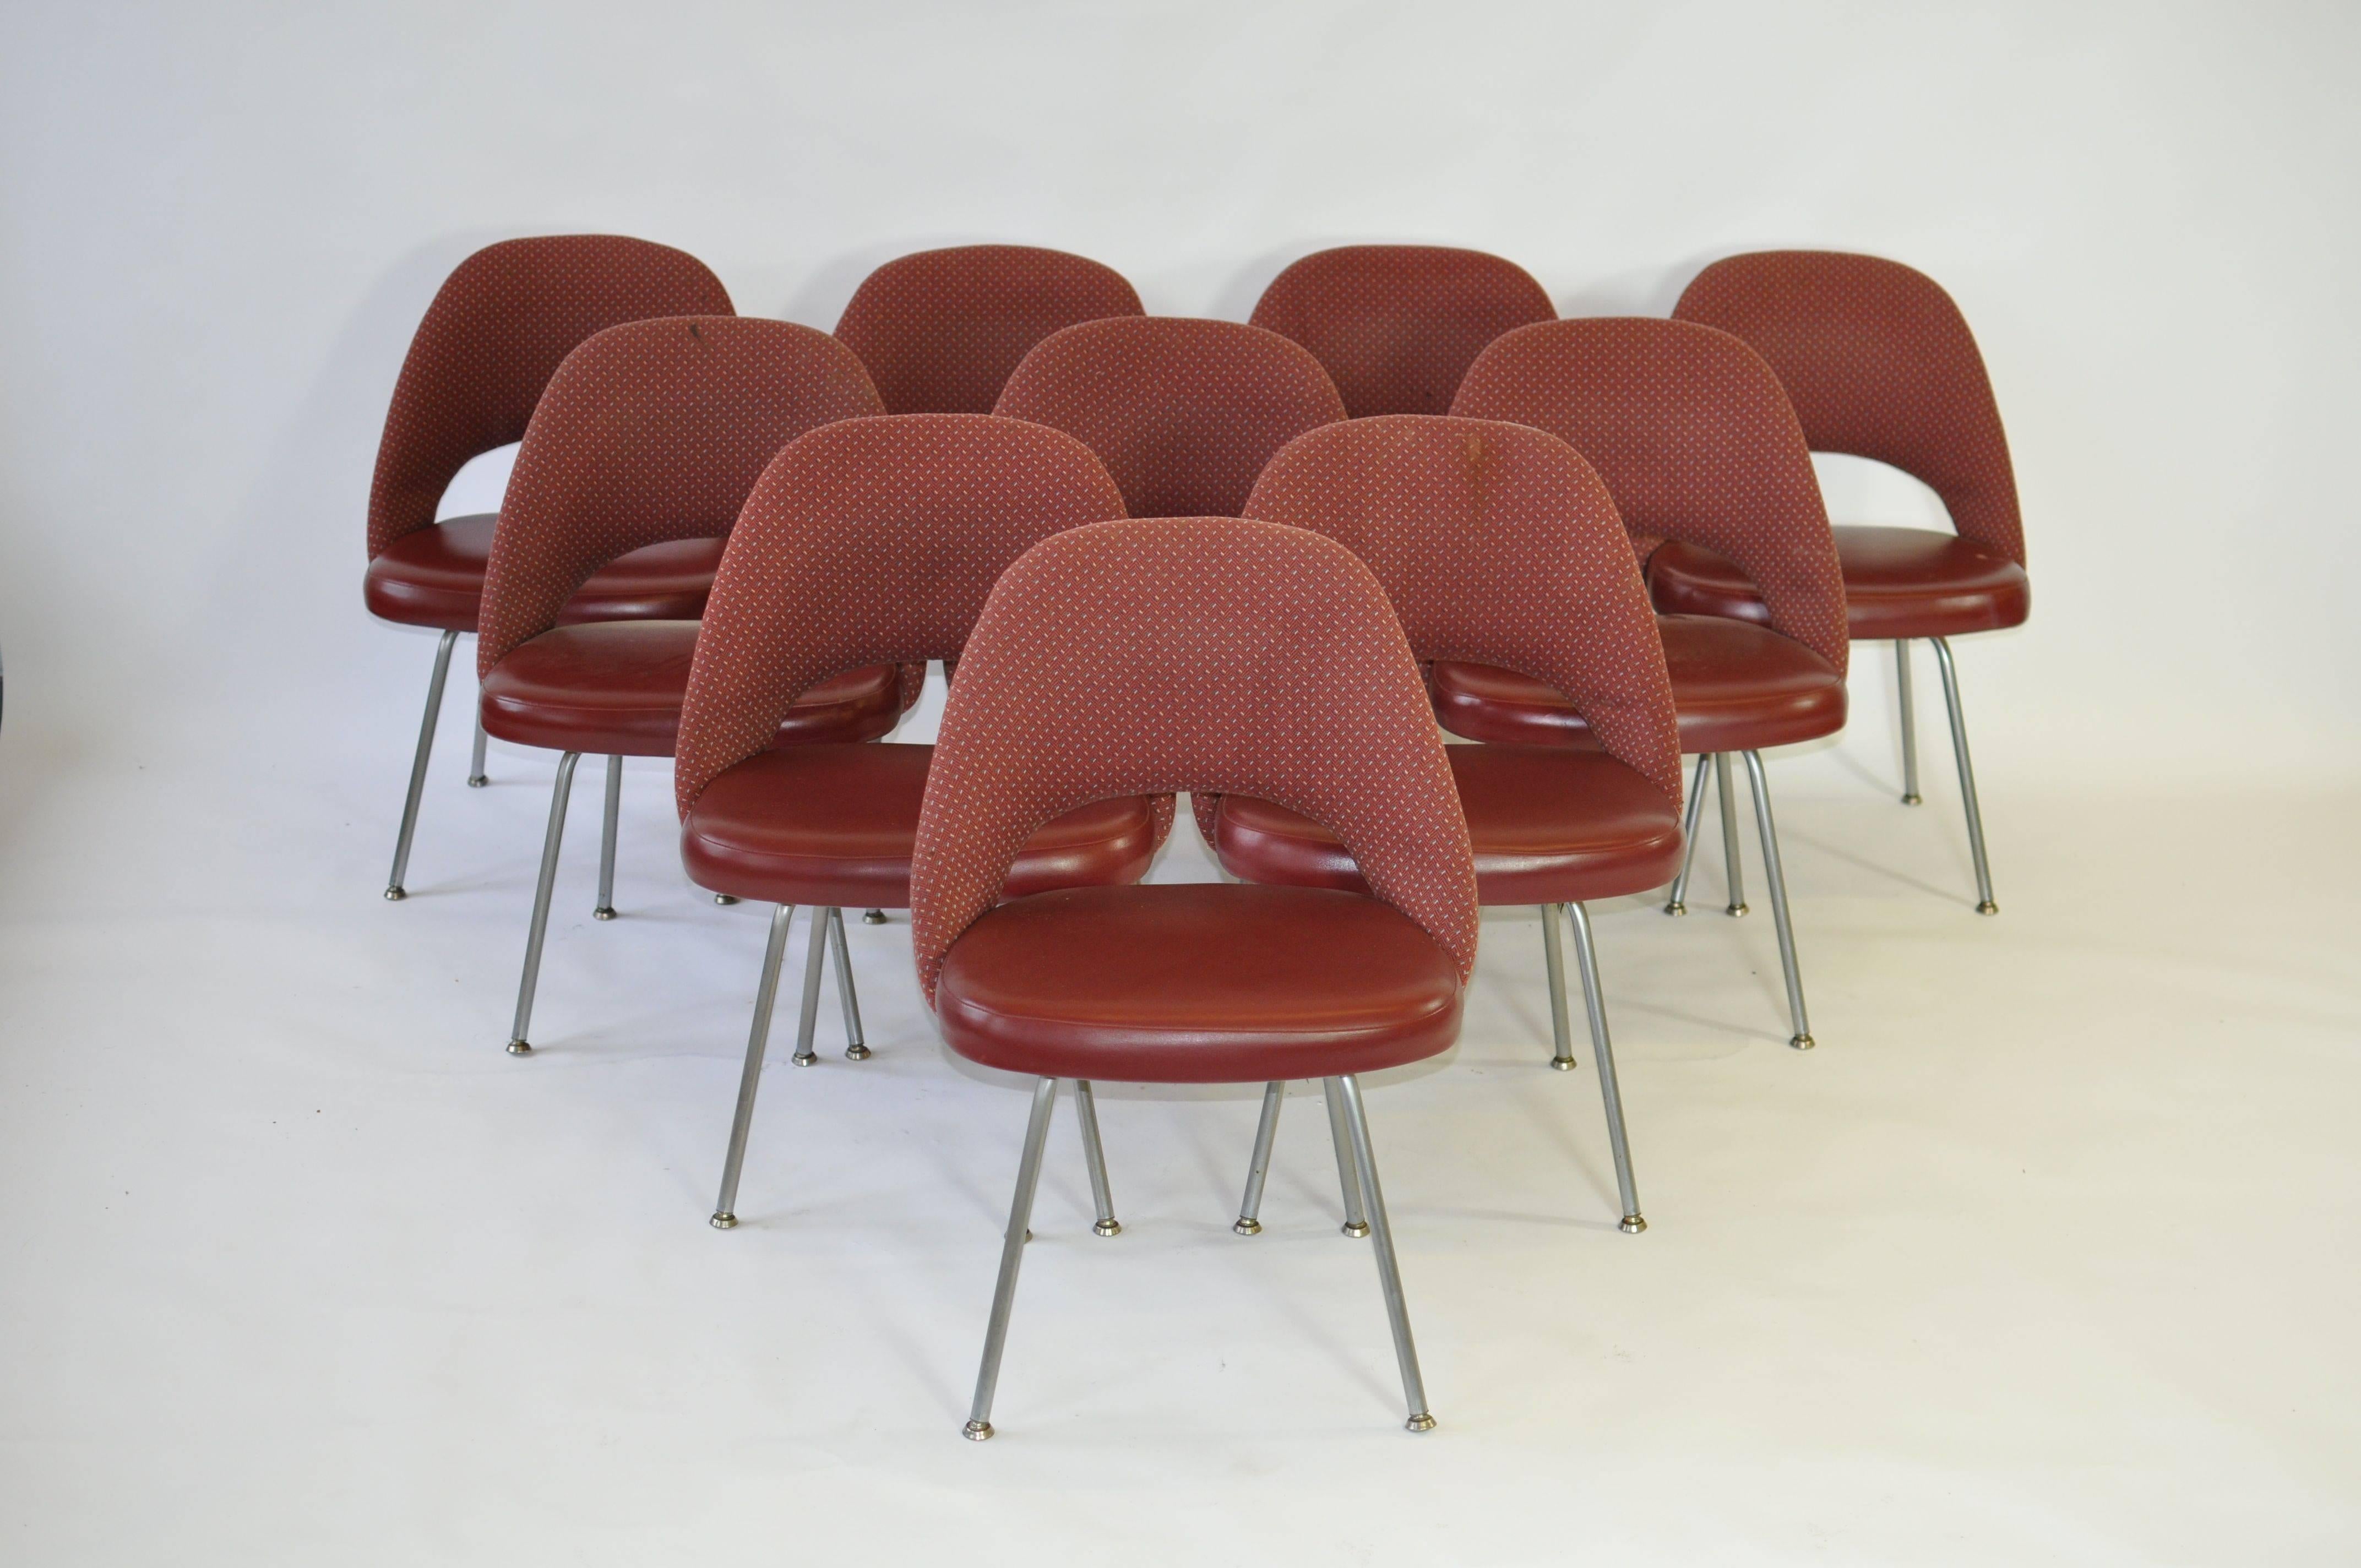 Set of ten vintage Eero Saarinen series 71 chairs for Knoll. More available.